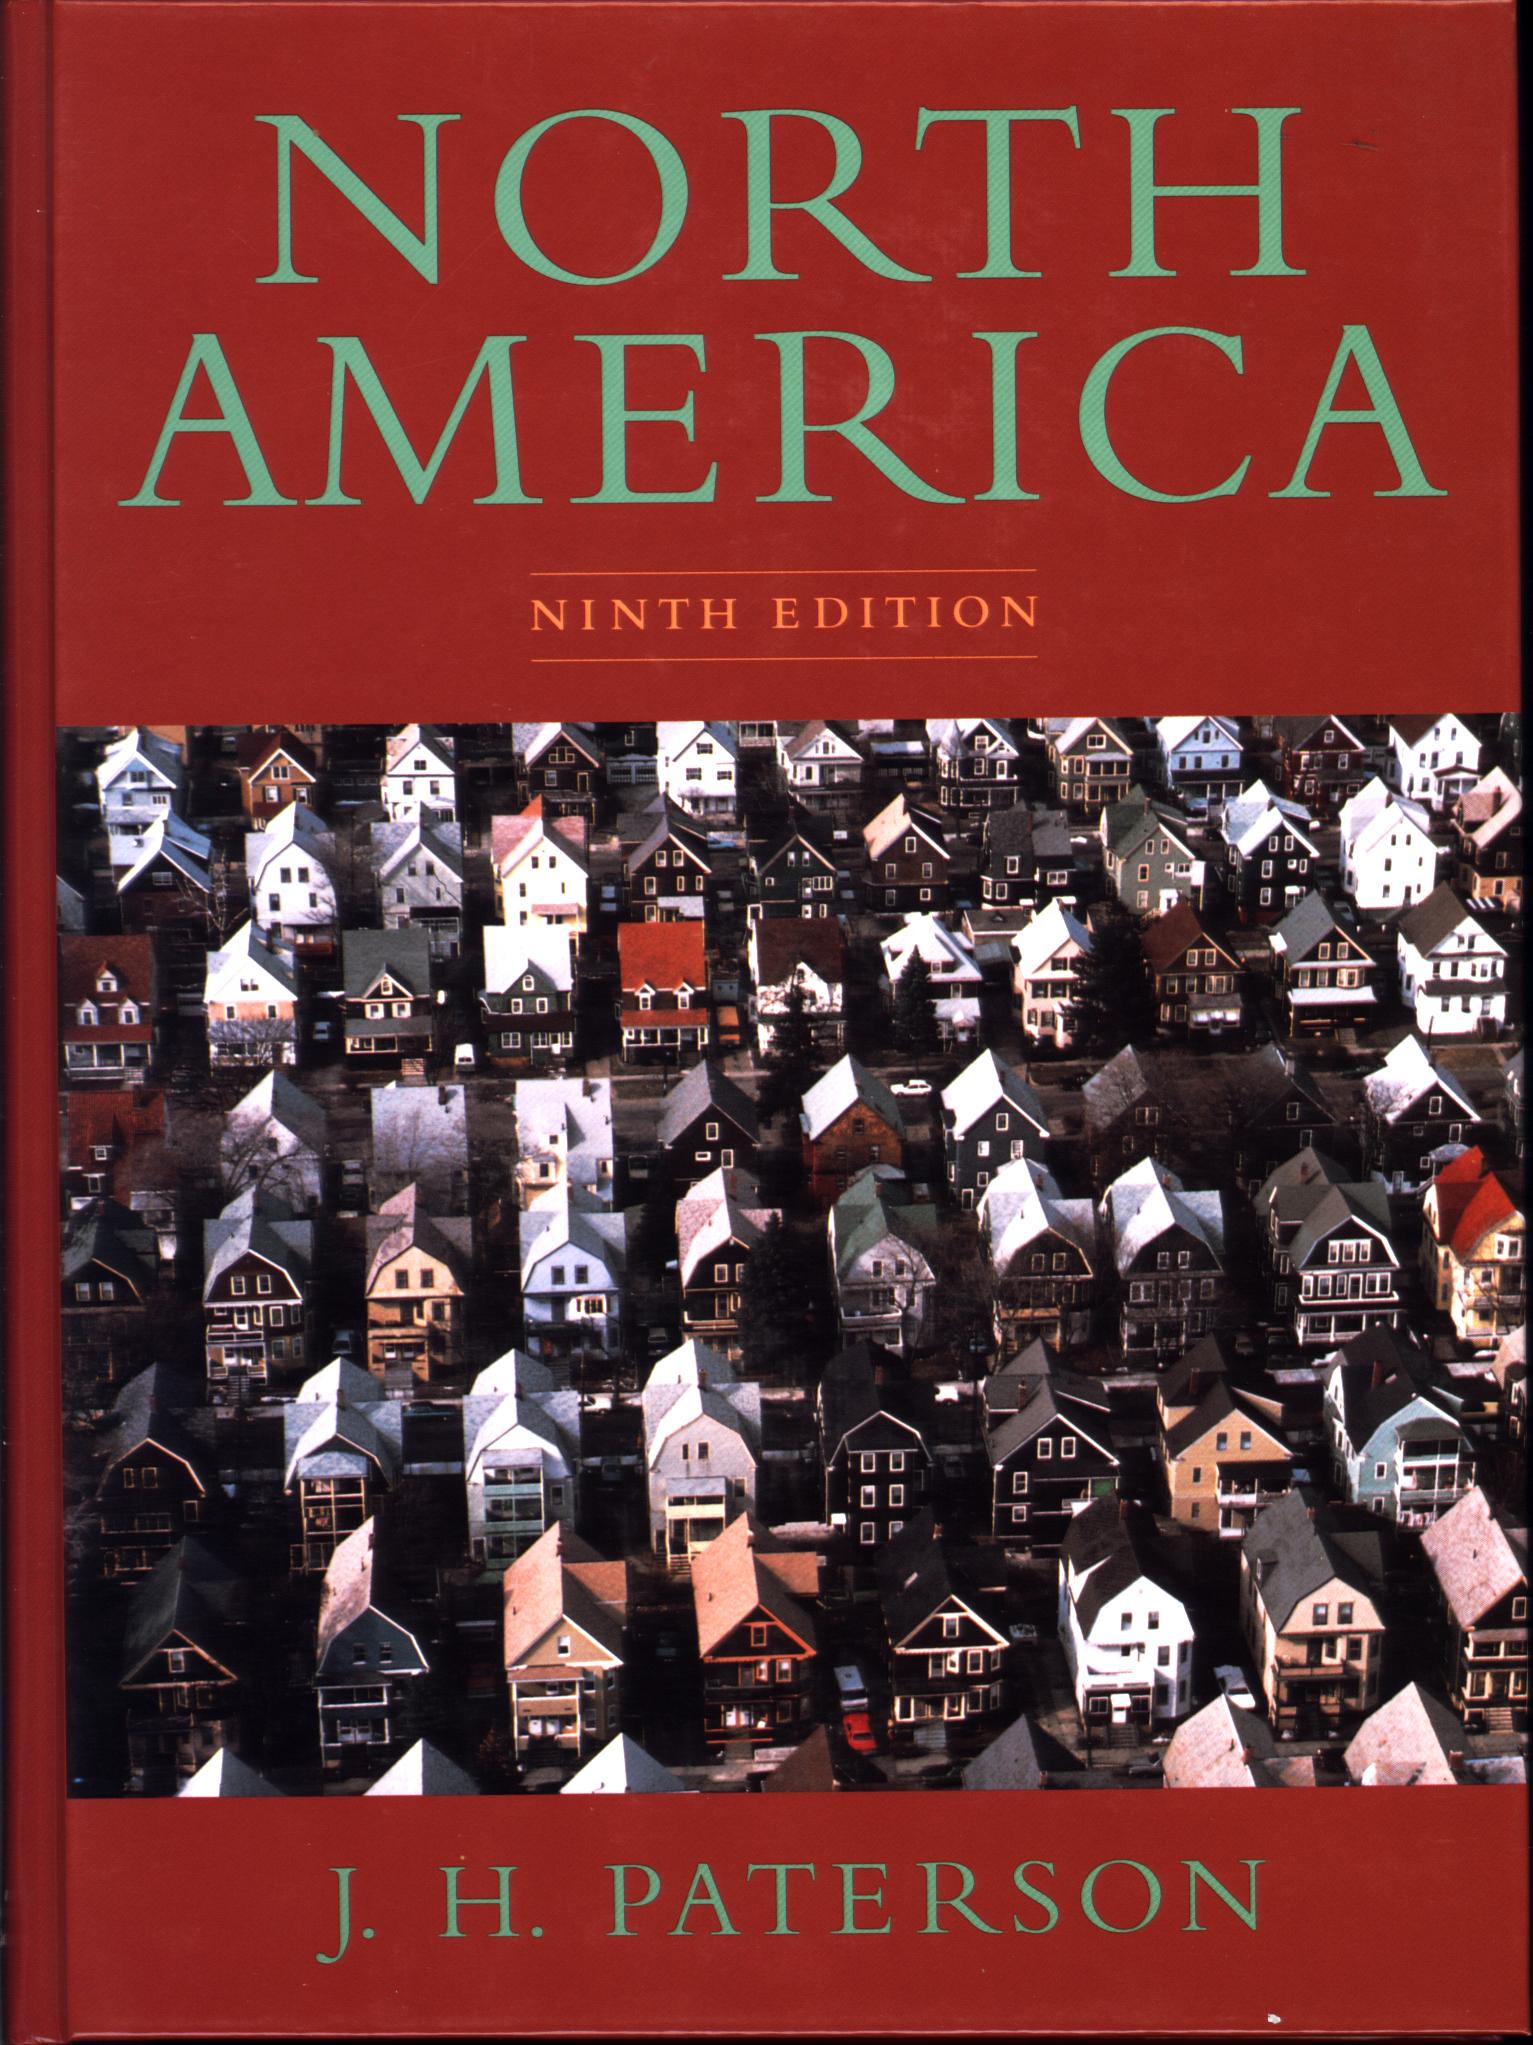 NORTH AMERICA: a geography of the United States and Canada.